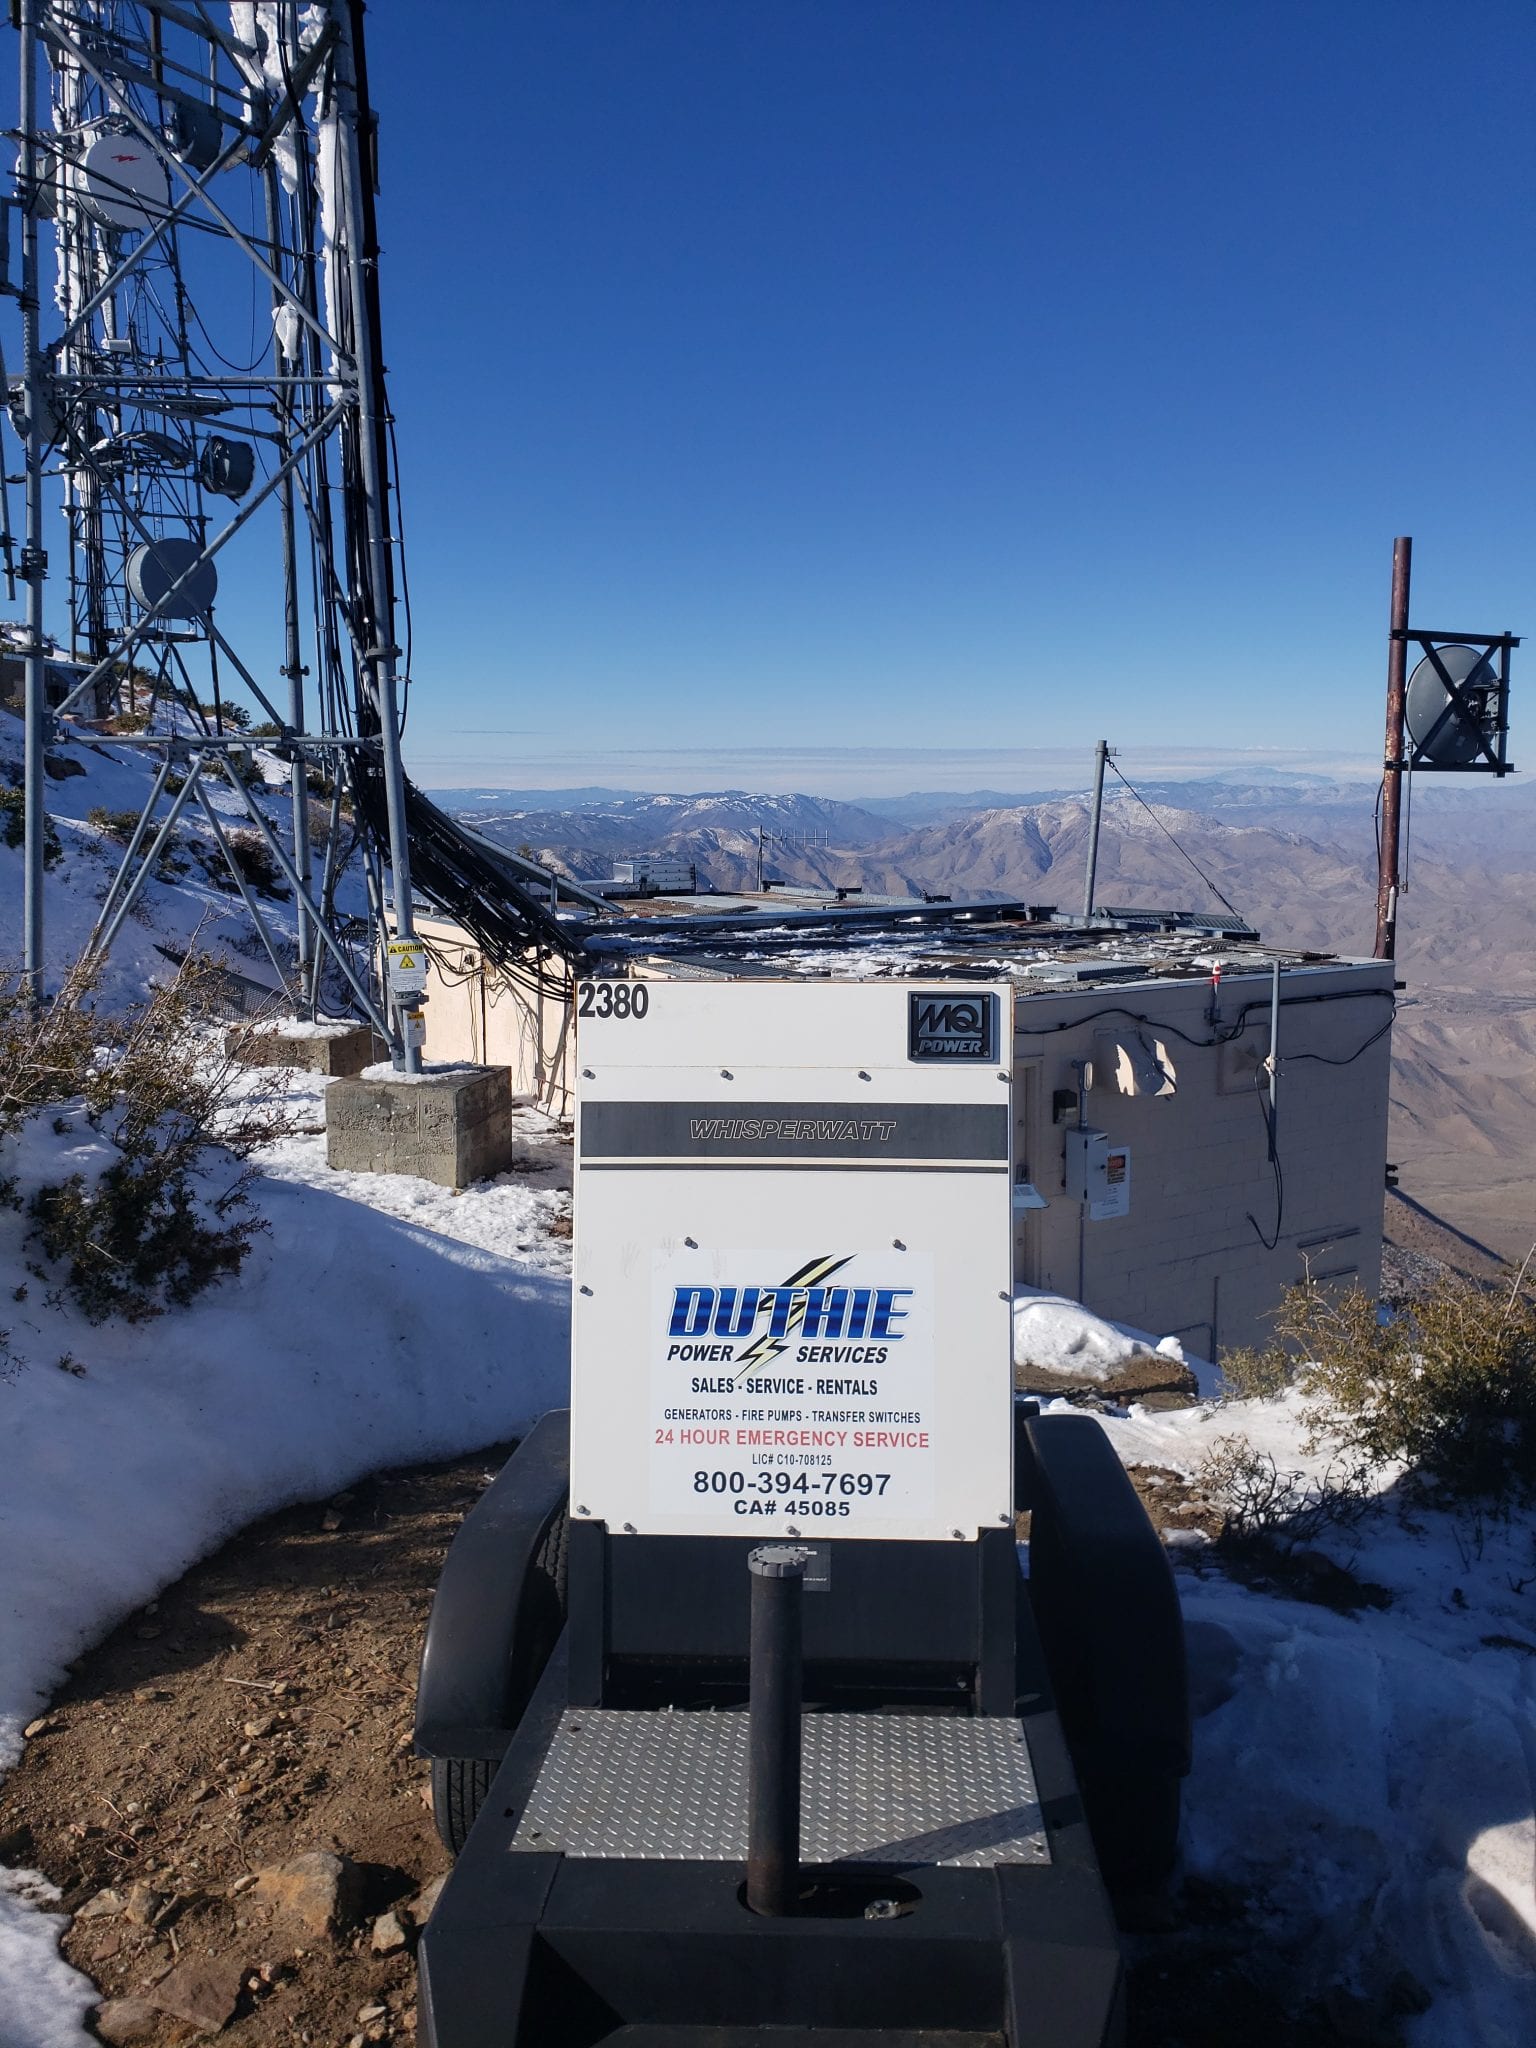 Duthie Power Services rental generator on a snowy mountaintop overlooking a valley.